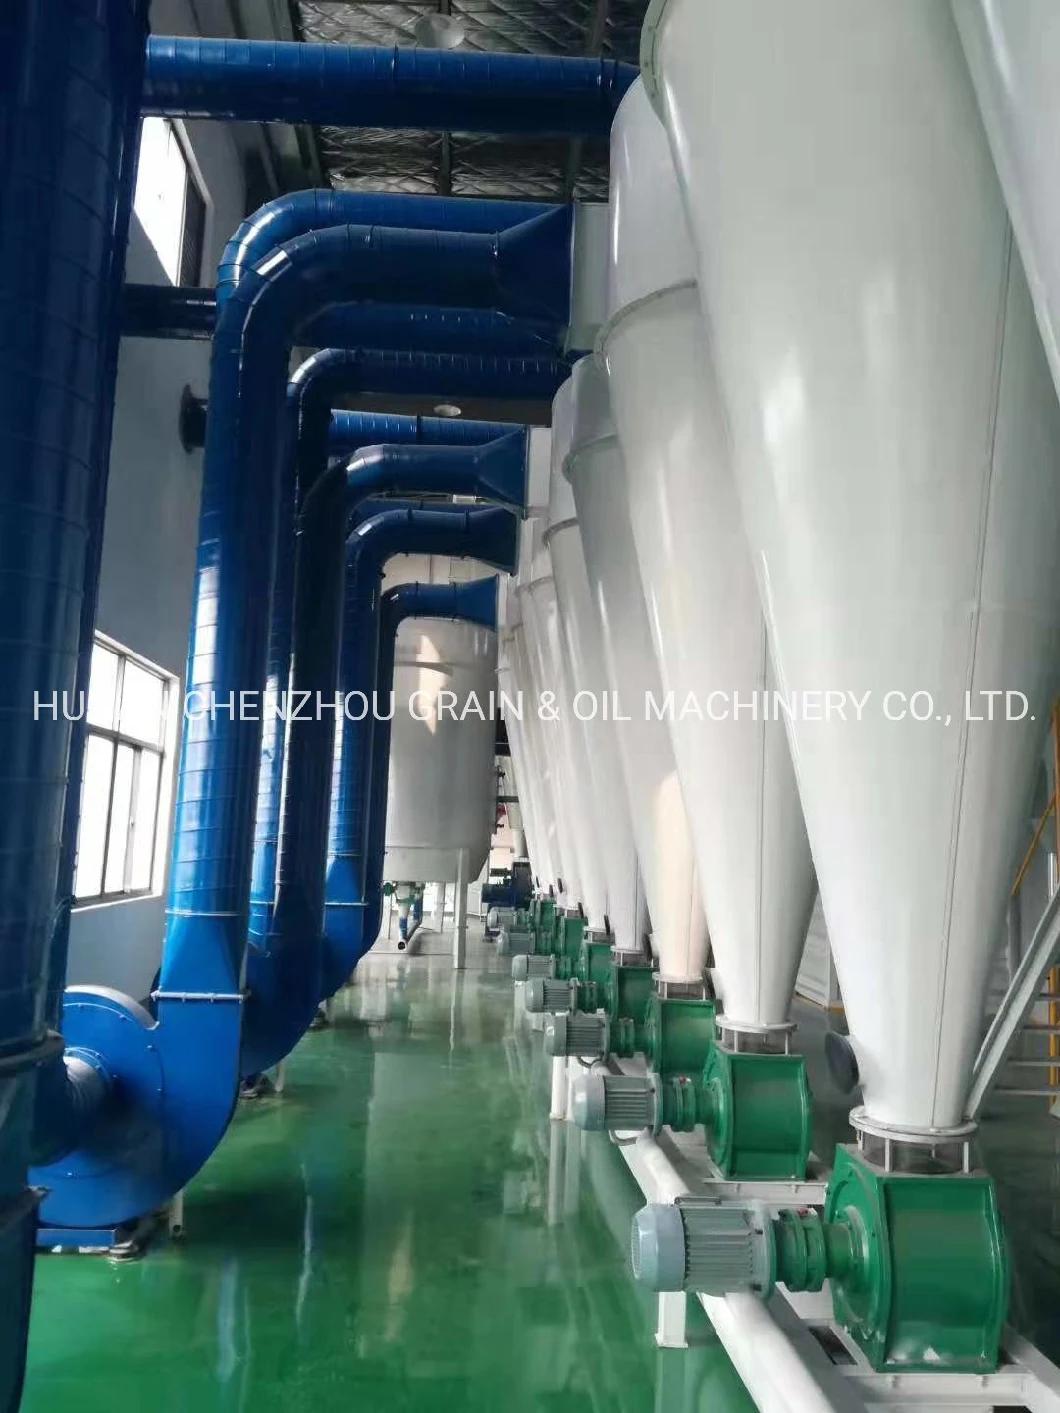 Dangladesh Parboiling Rice Mill Aromatic Rice Mill Machine